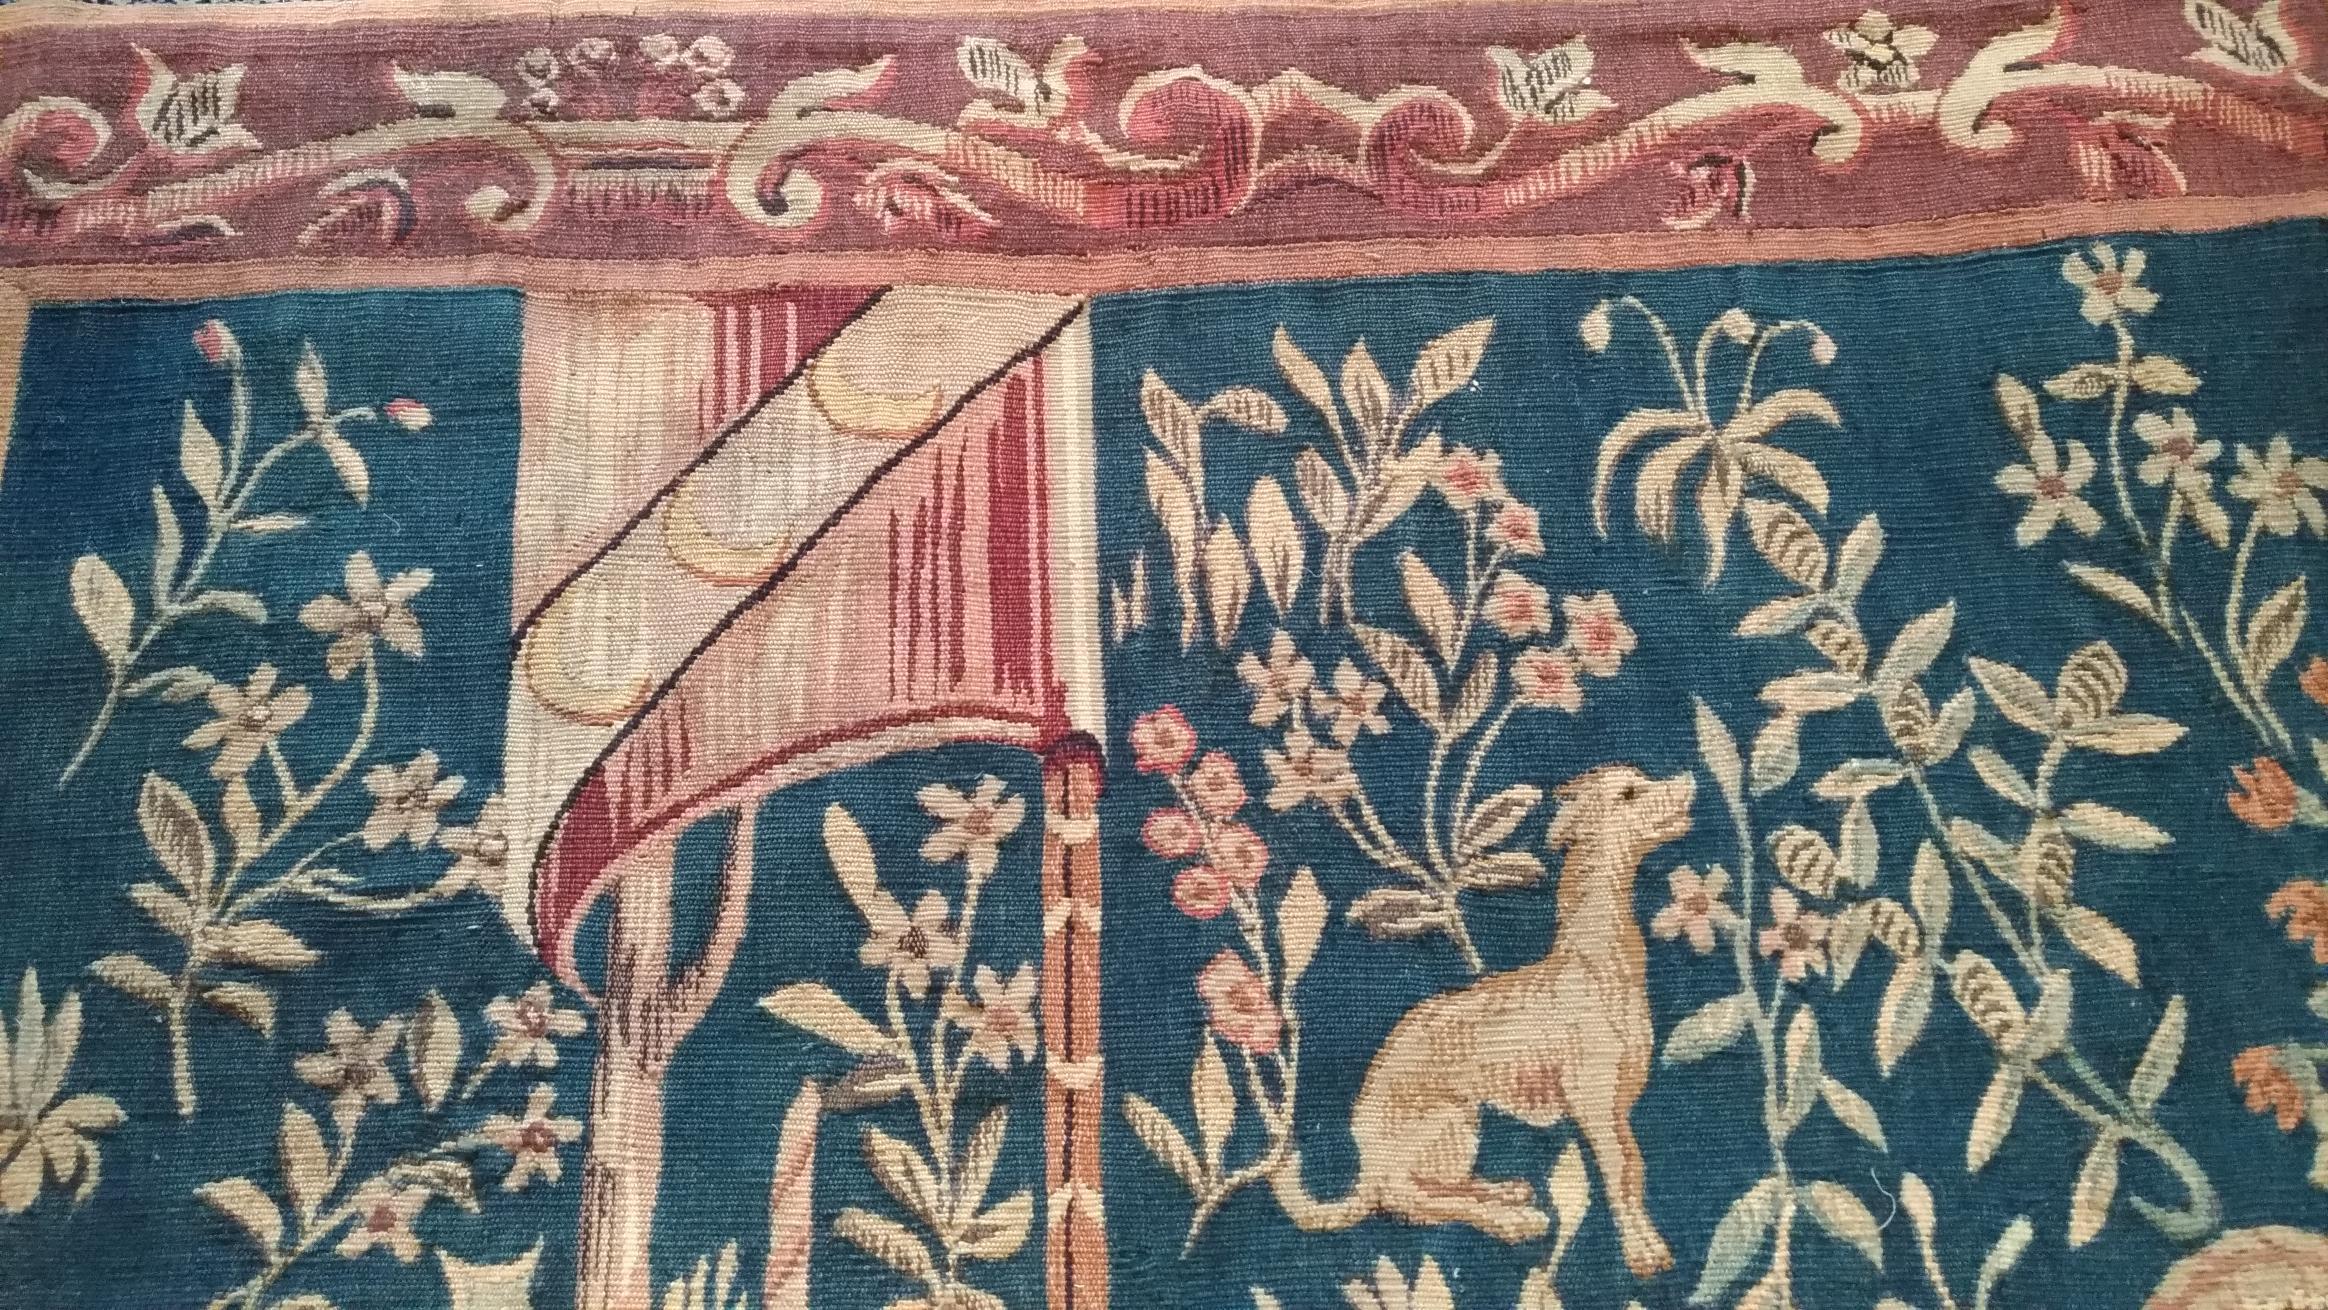 Hand-Woven  1107 - Aubusson Tapestry 19th Century Lady with the Unicorn  For Sale